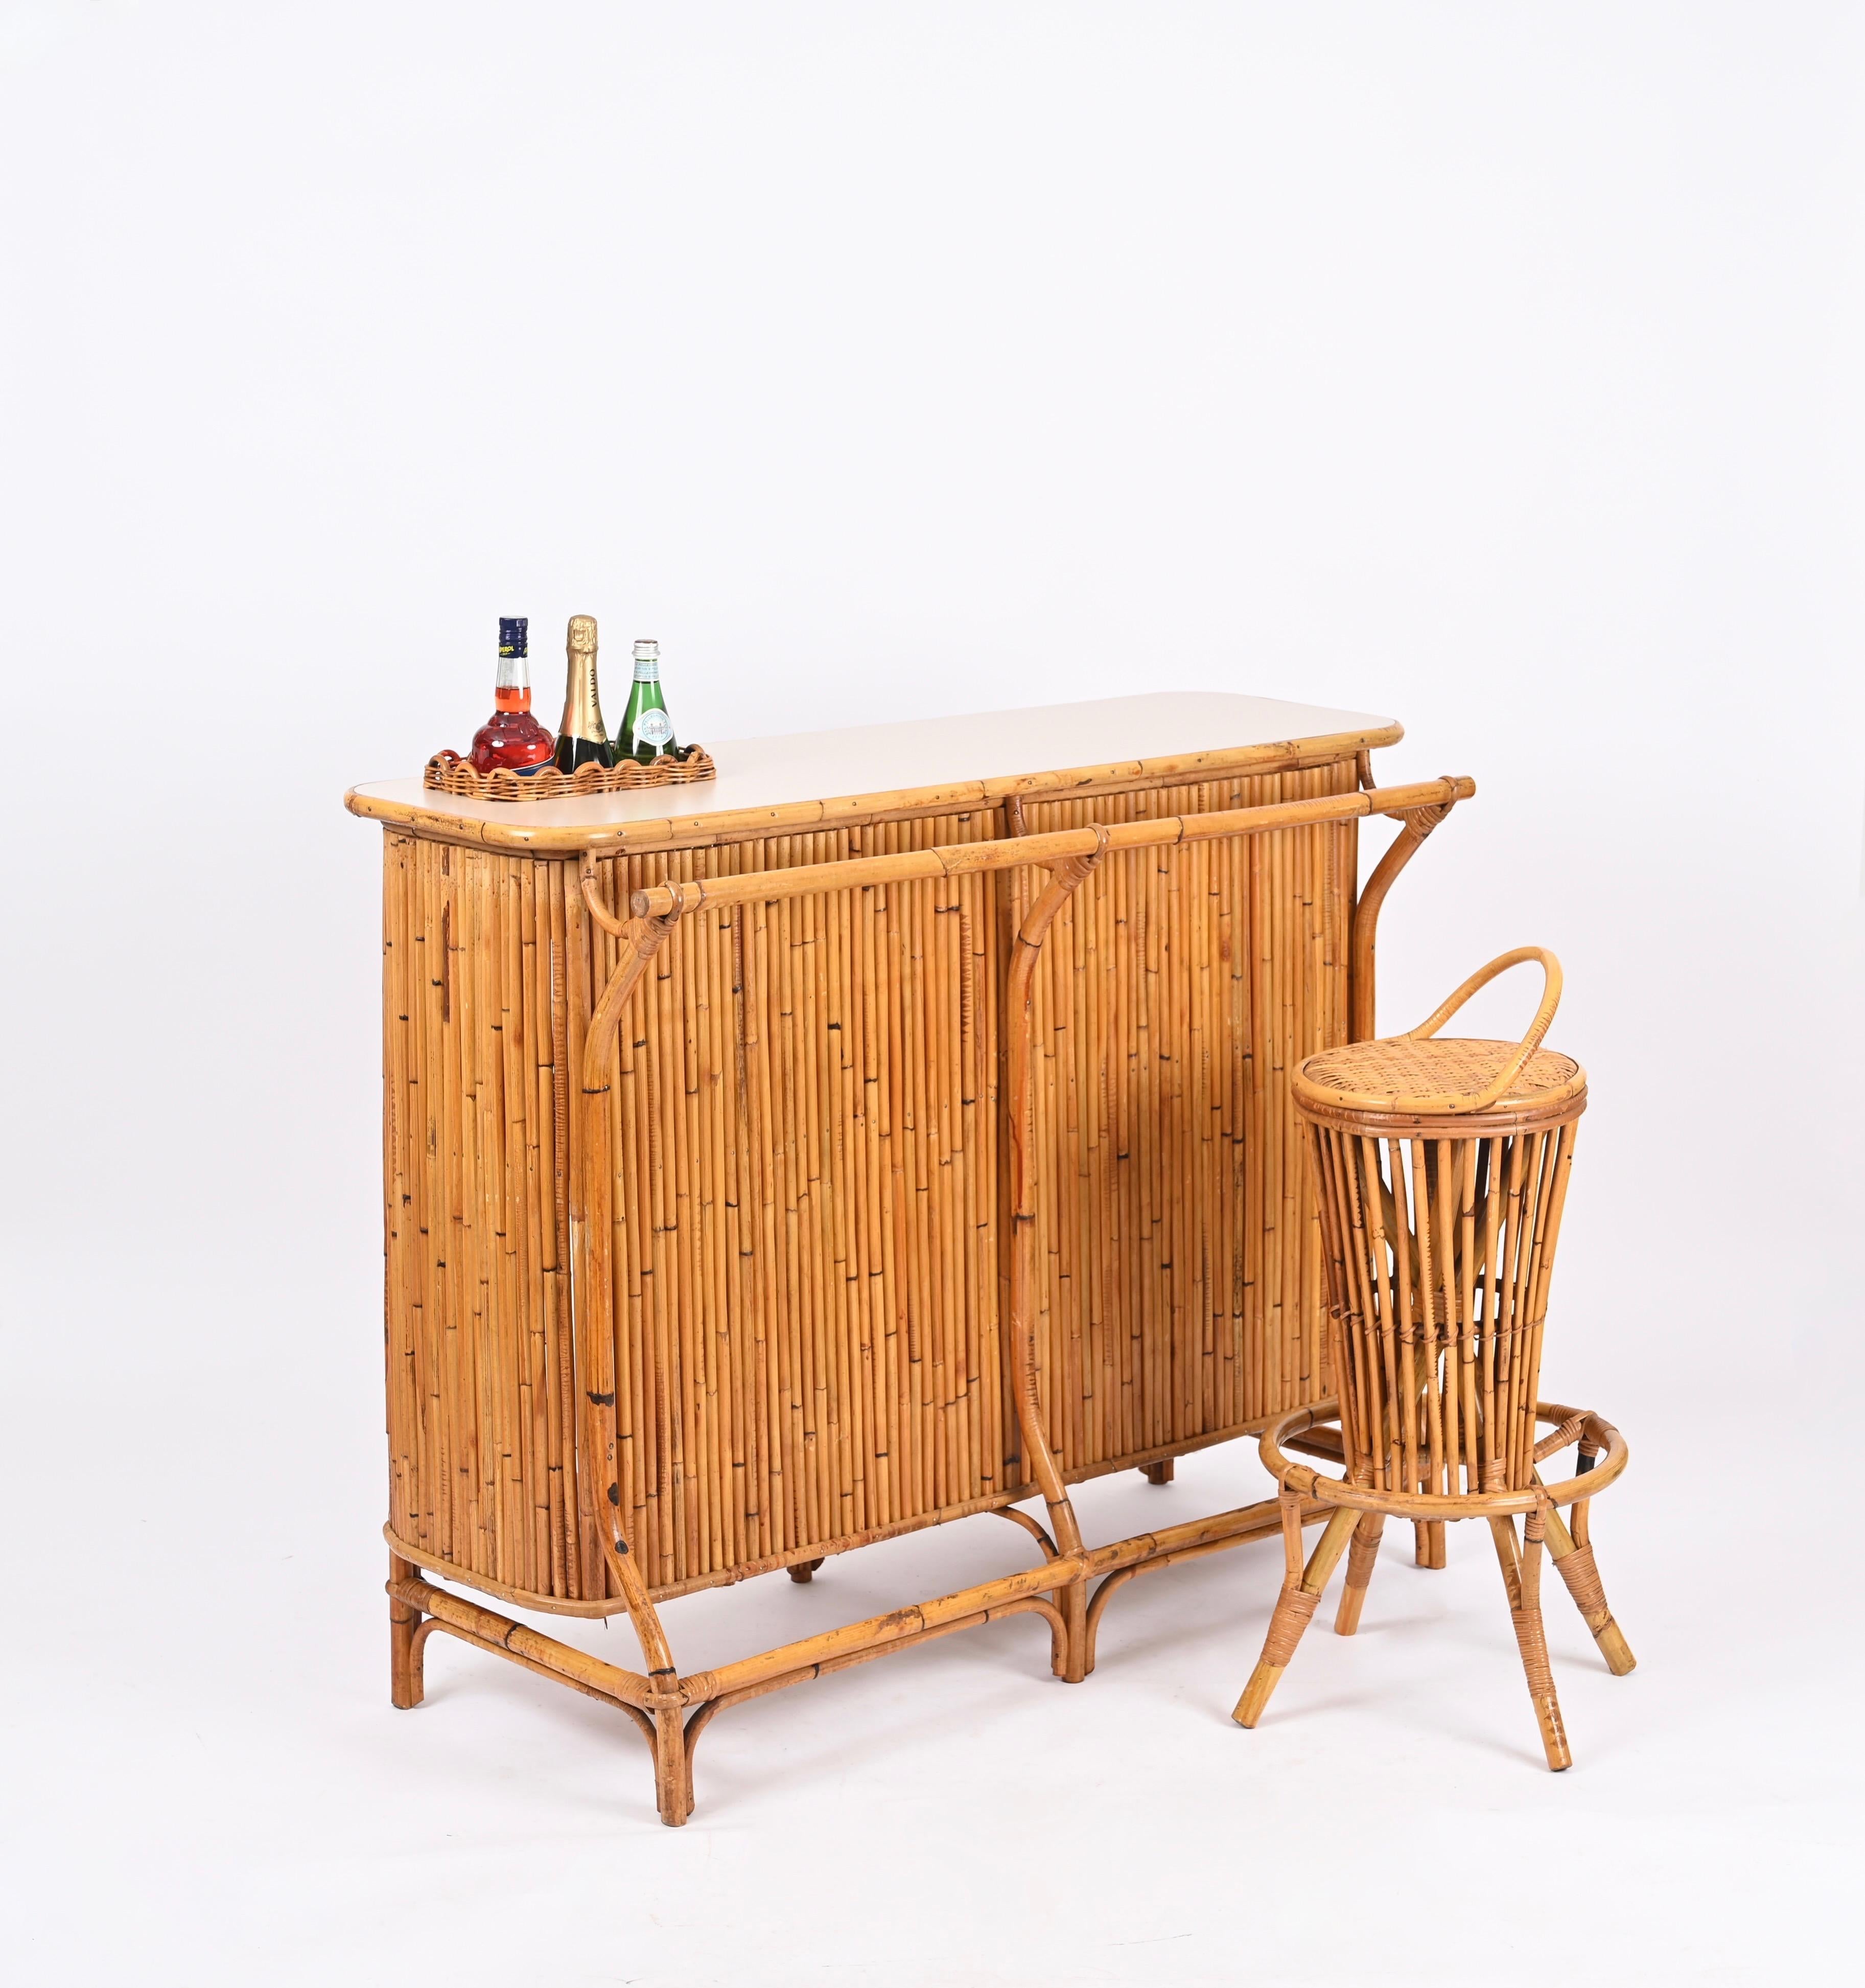 Dry Bar with Two Stools in Rattan, Bamboo and Wicker by Tito Agnoli, Italy 1950s For Sale 4